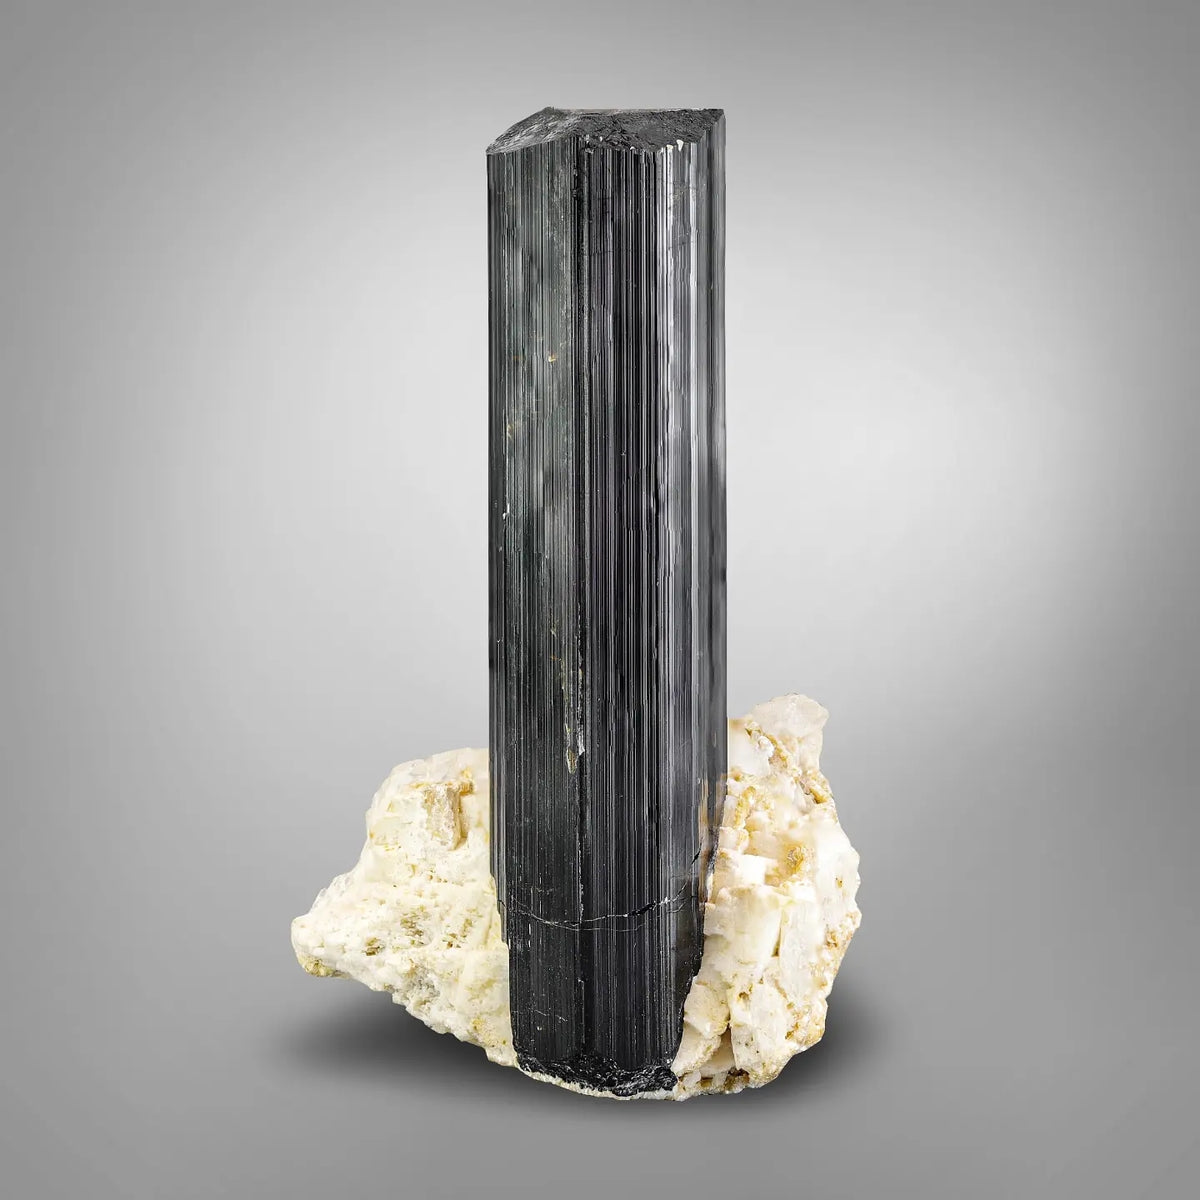 Embrace Positive Mineral Energy with Black Tourmaline Gemstones from Pakistan